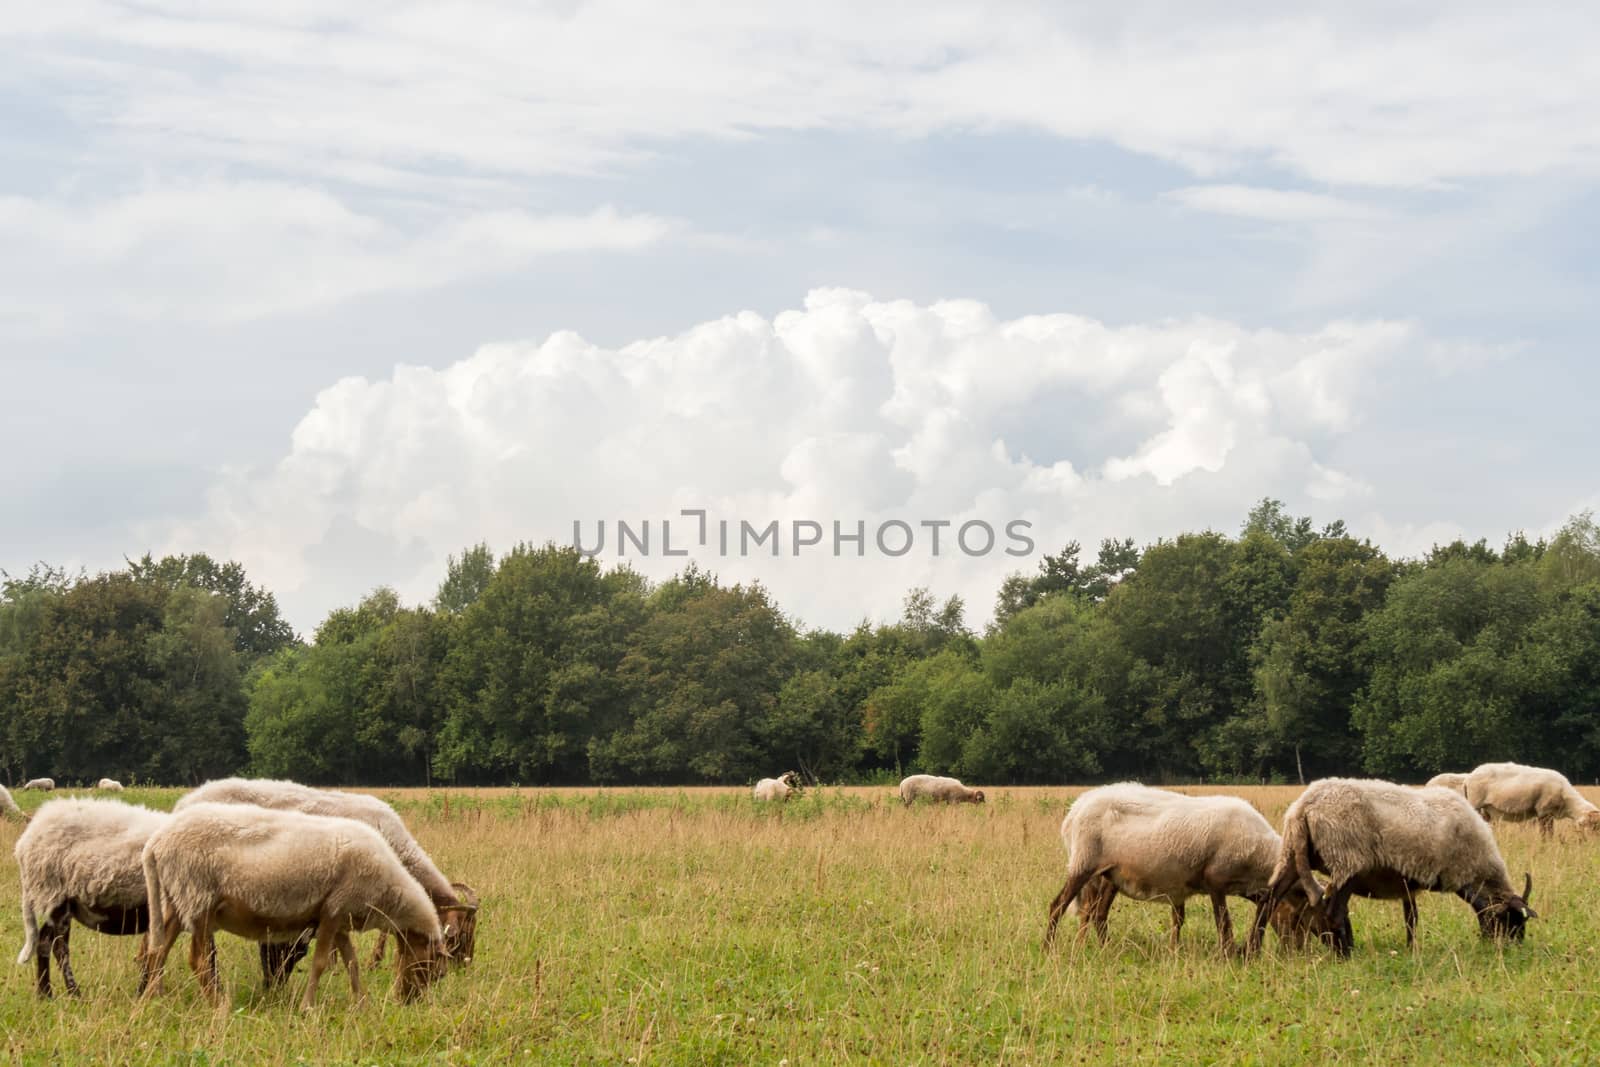 Group of sheep with horns standing in a meadow with a big cloud overhead